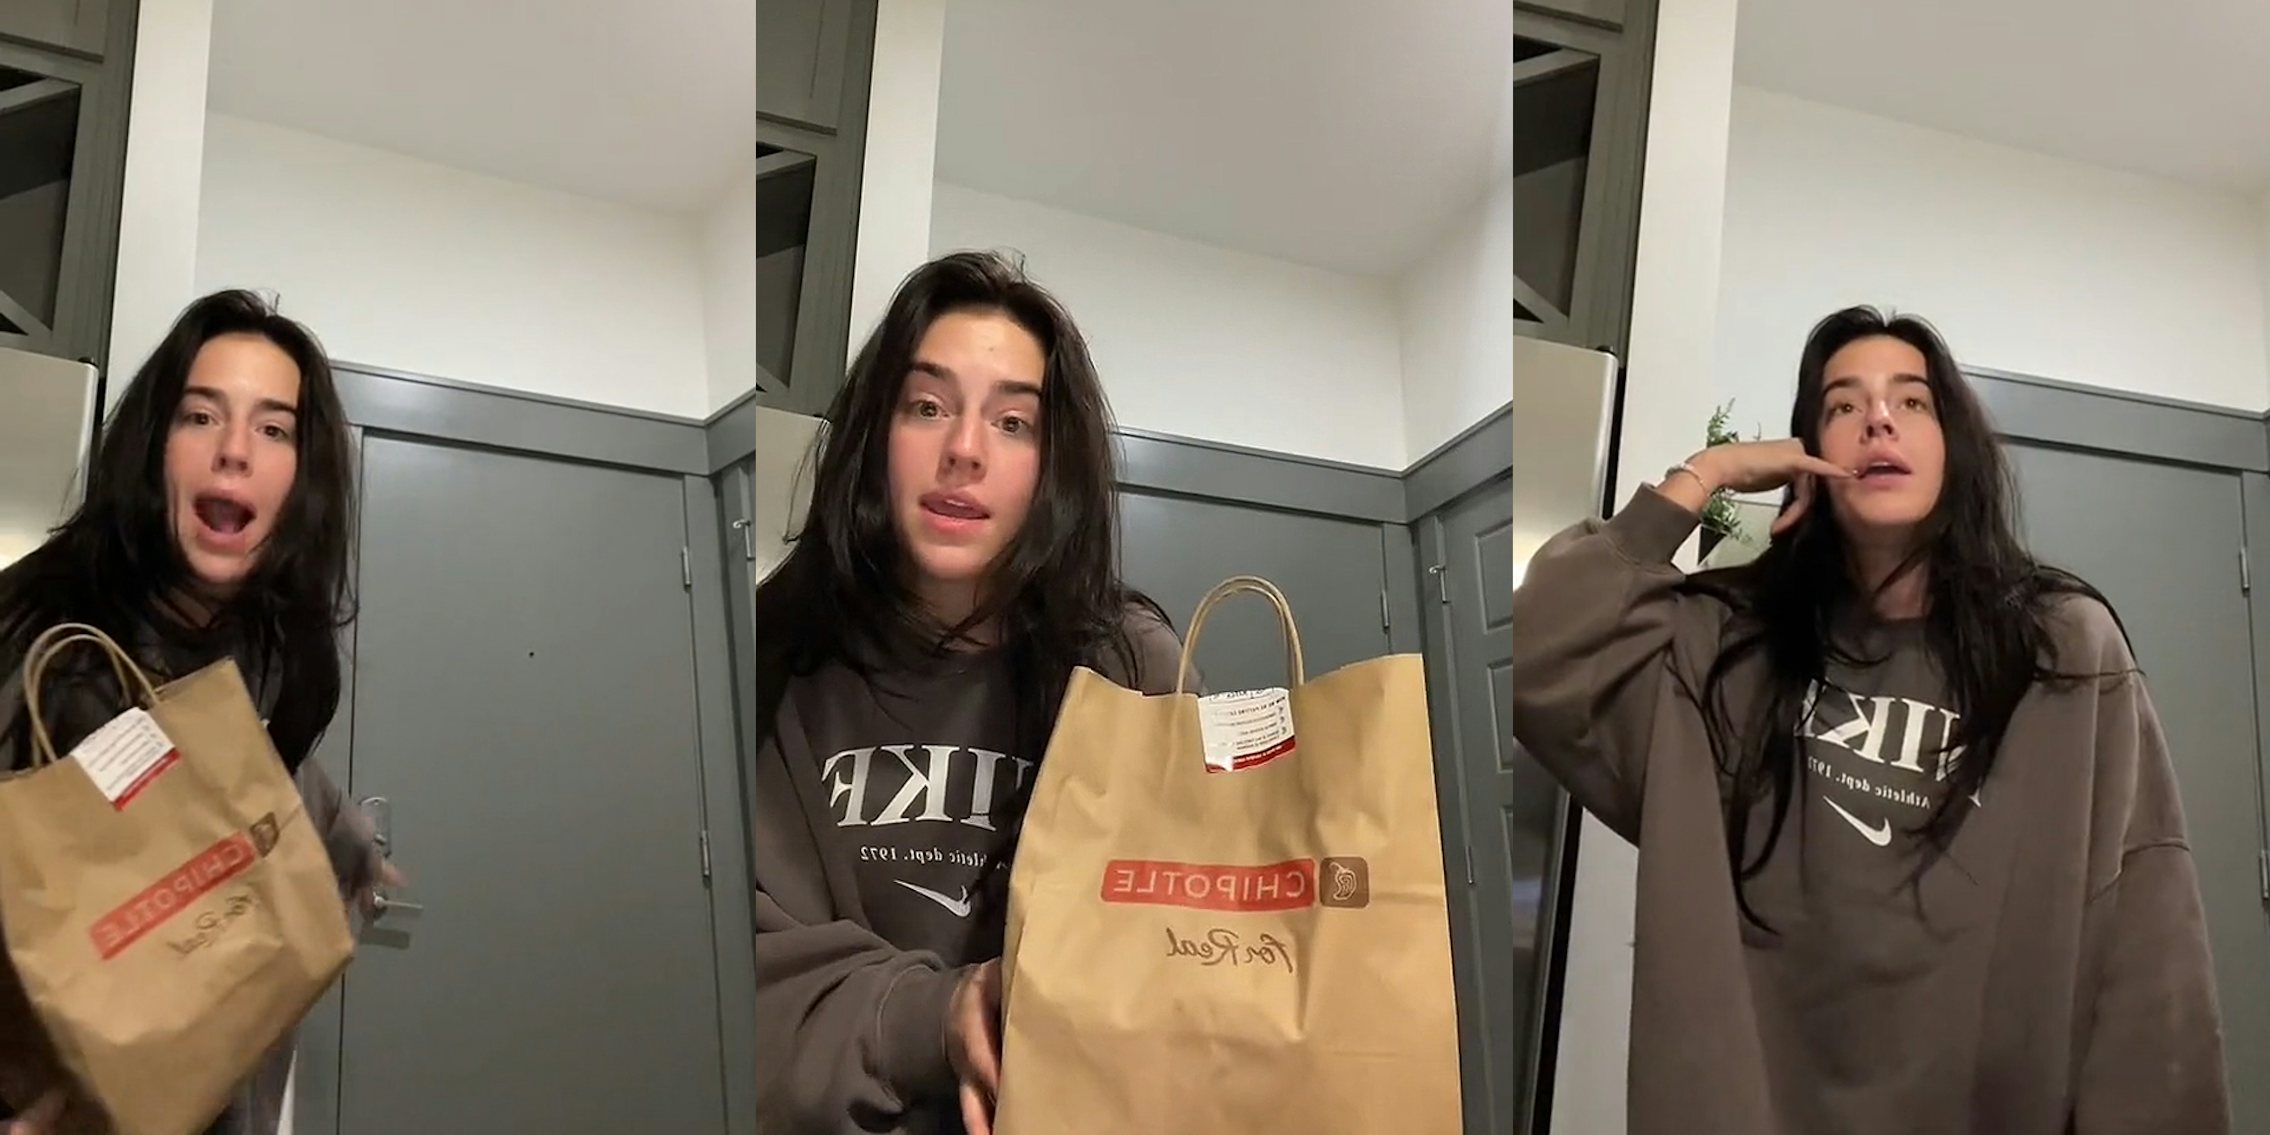 woman speaking pointing to gray door while holding DoorDash Chipotle delivery bag (l) woman speaking in front of gray door holding DoorDash Chipotle delivery bag (c) woman speaking in front of gray door making phone gesture with hand up to ear (r)